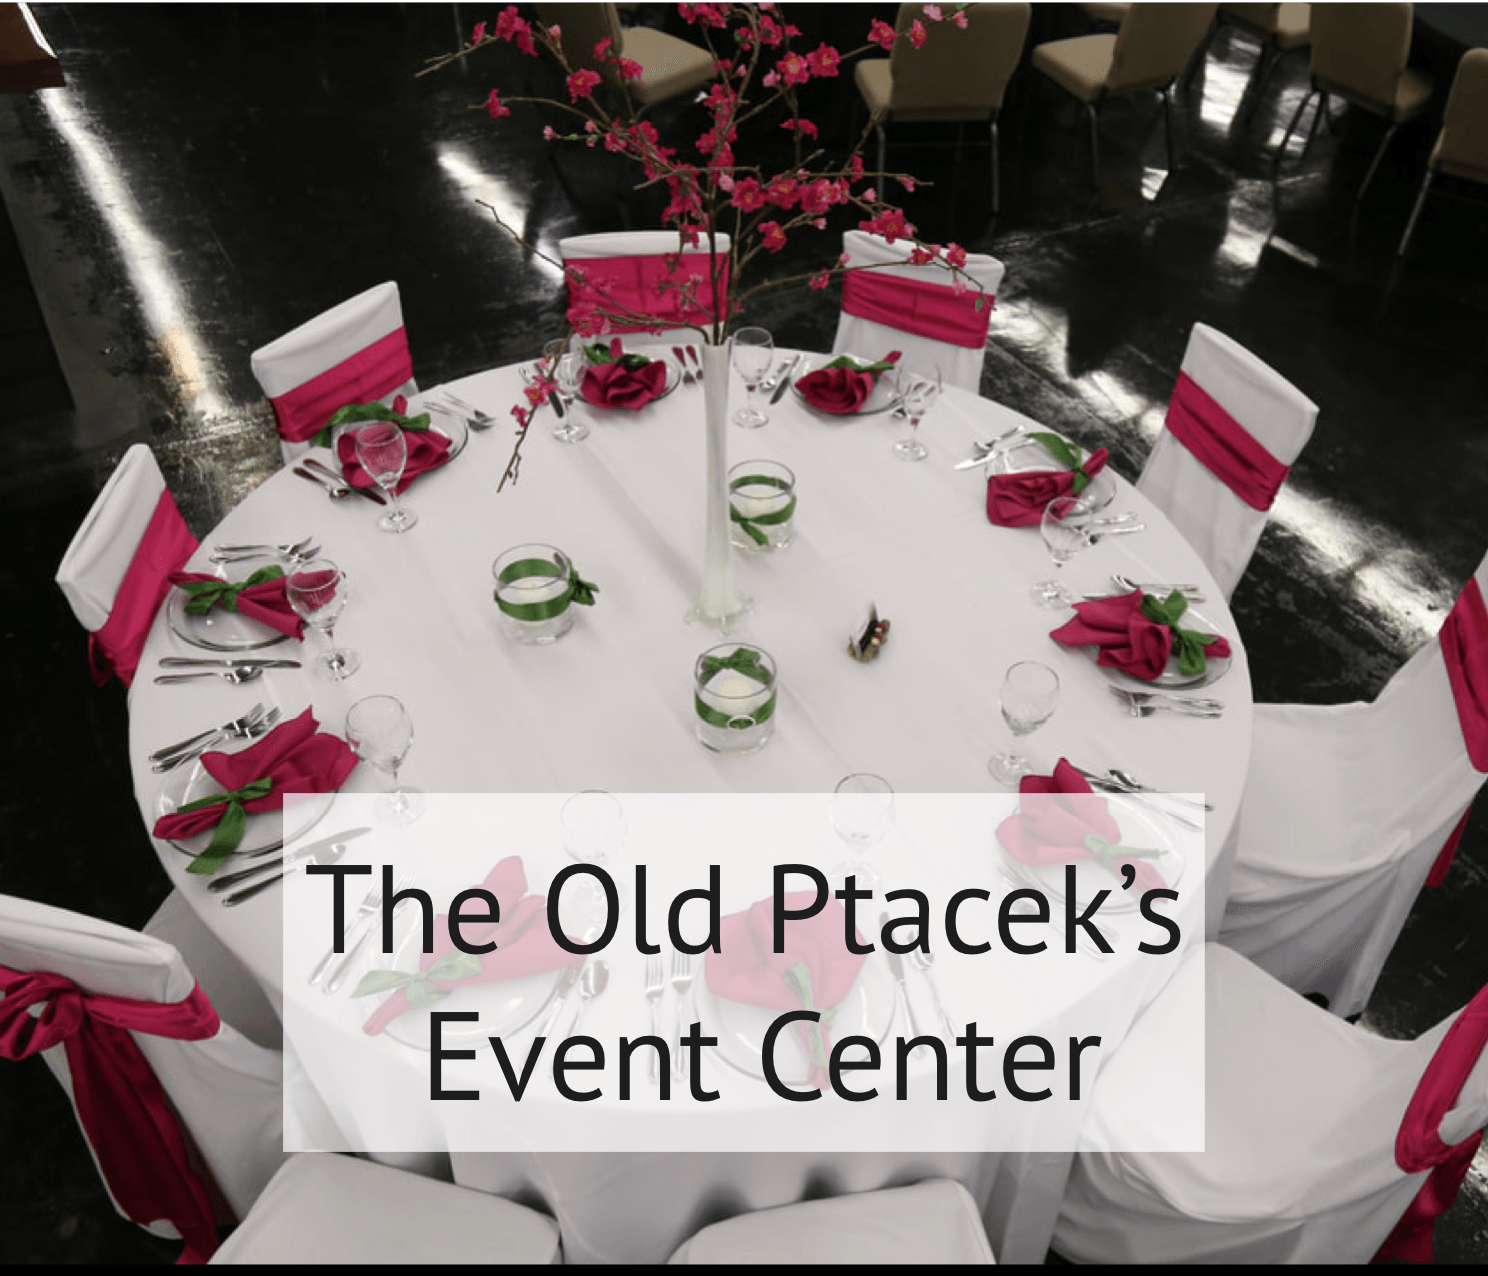 The Old Ptacek's Event Center